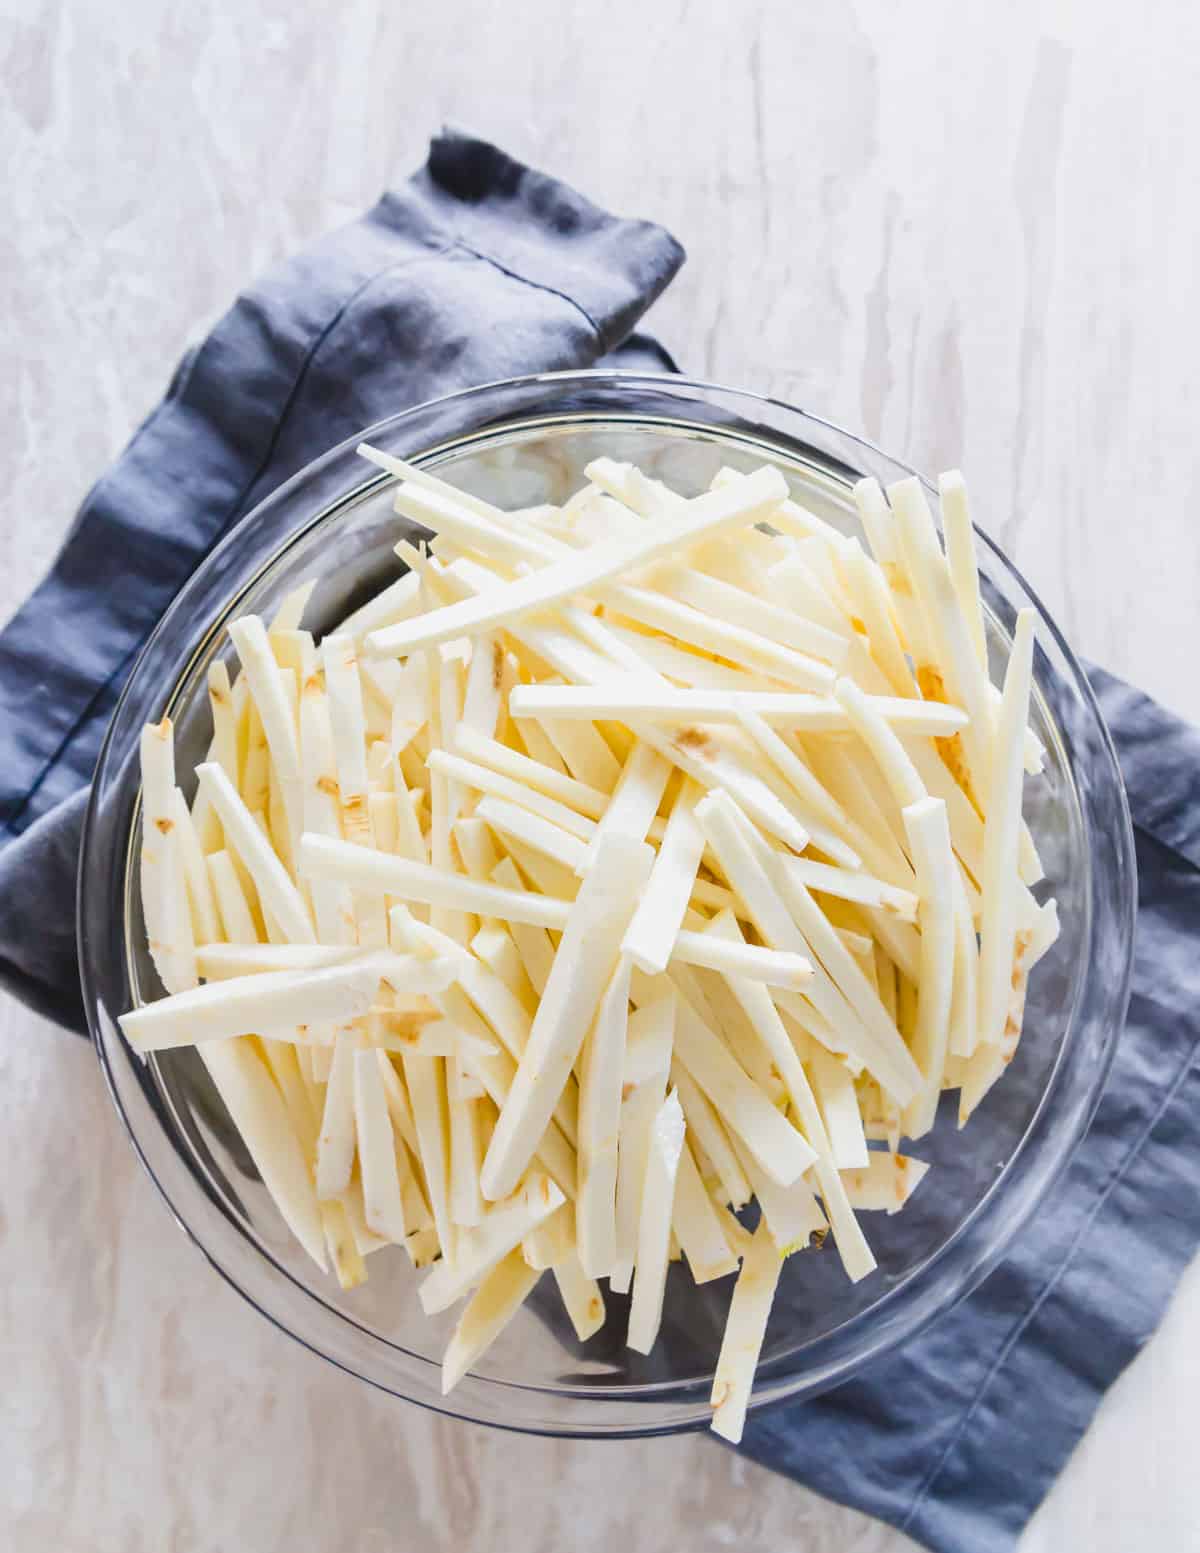 Raw parsnips cut into "fries" or matchsticks in a bowl.